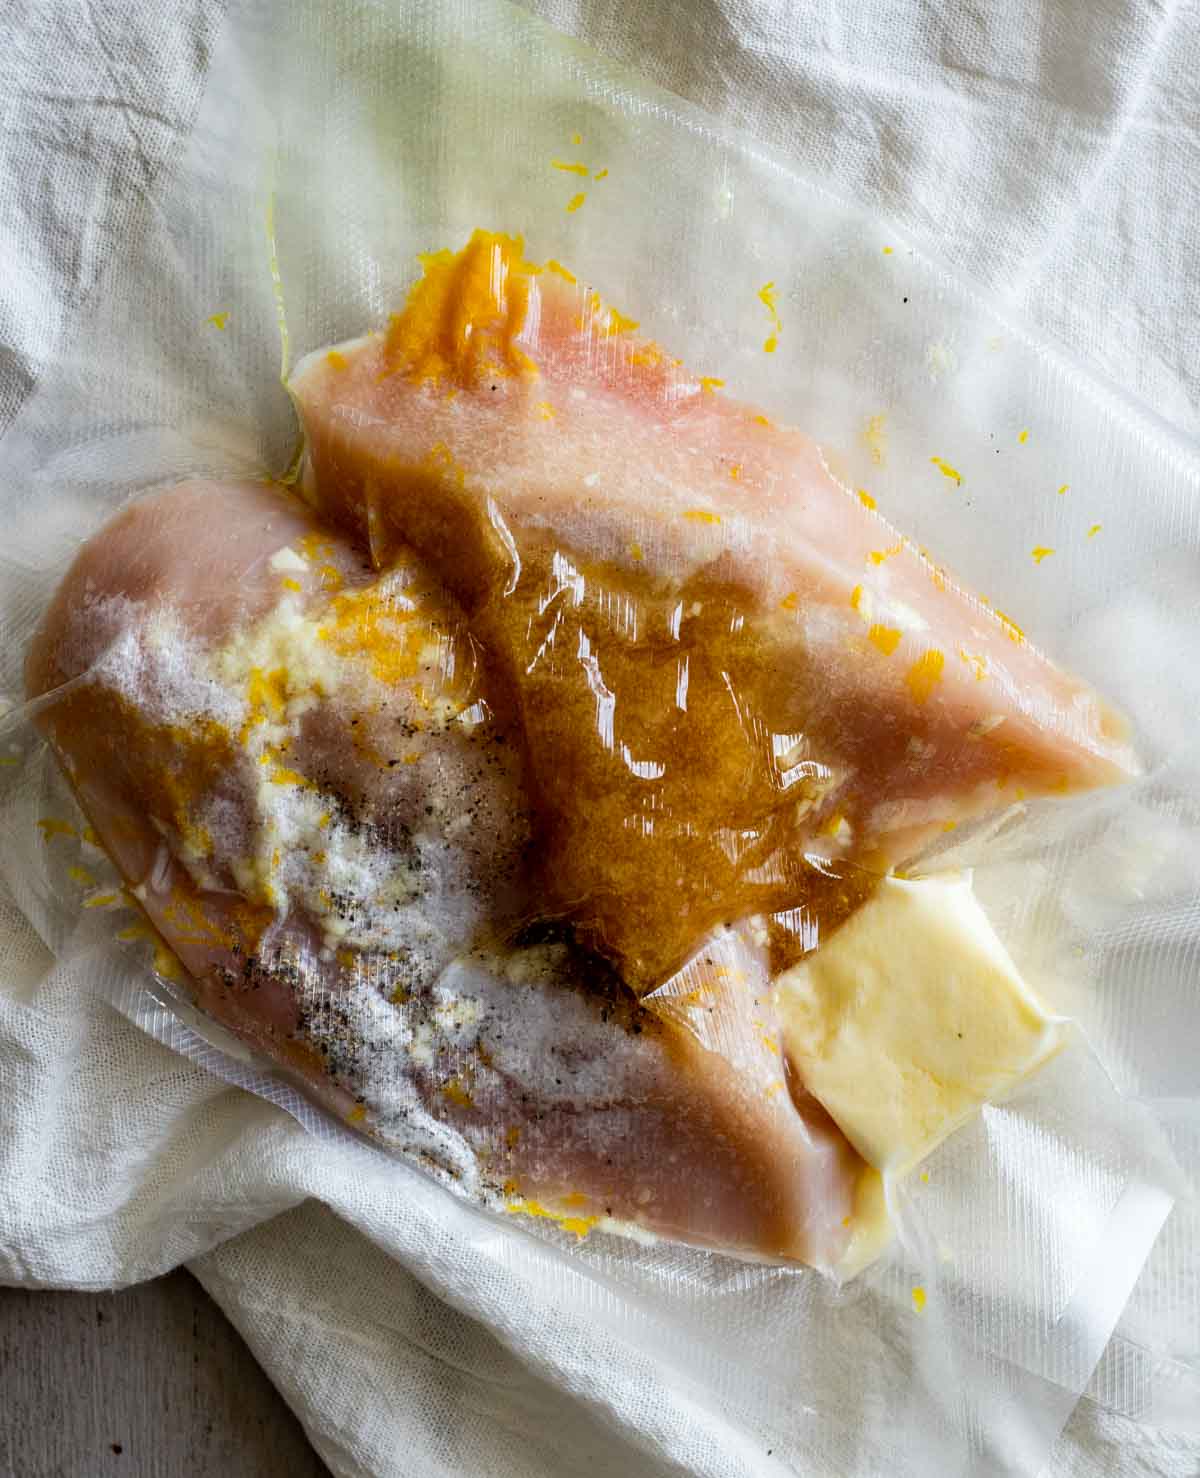 Two boneless, skinless chicken breasts in a vacuum sealed bag with butter and other ingredients.